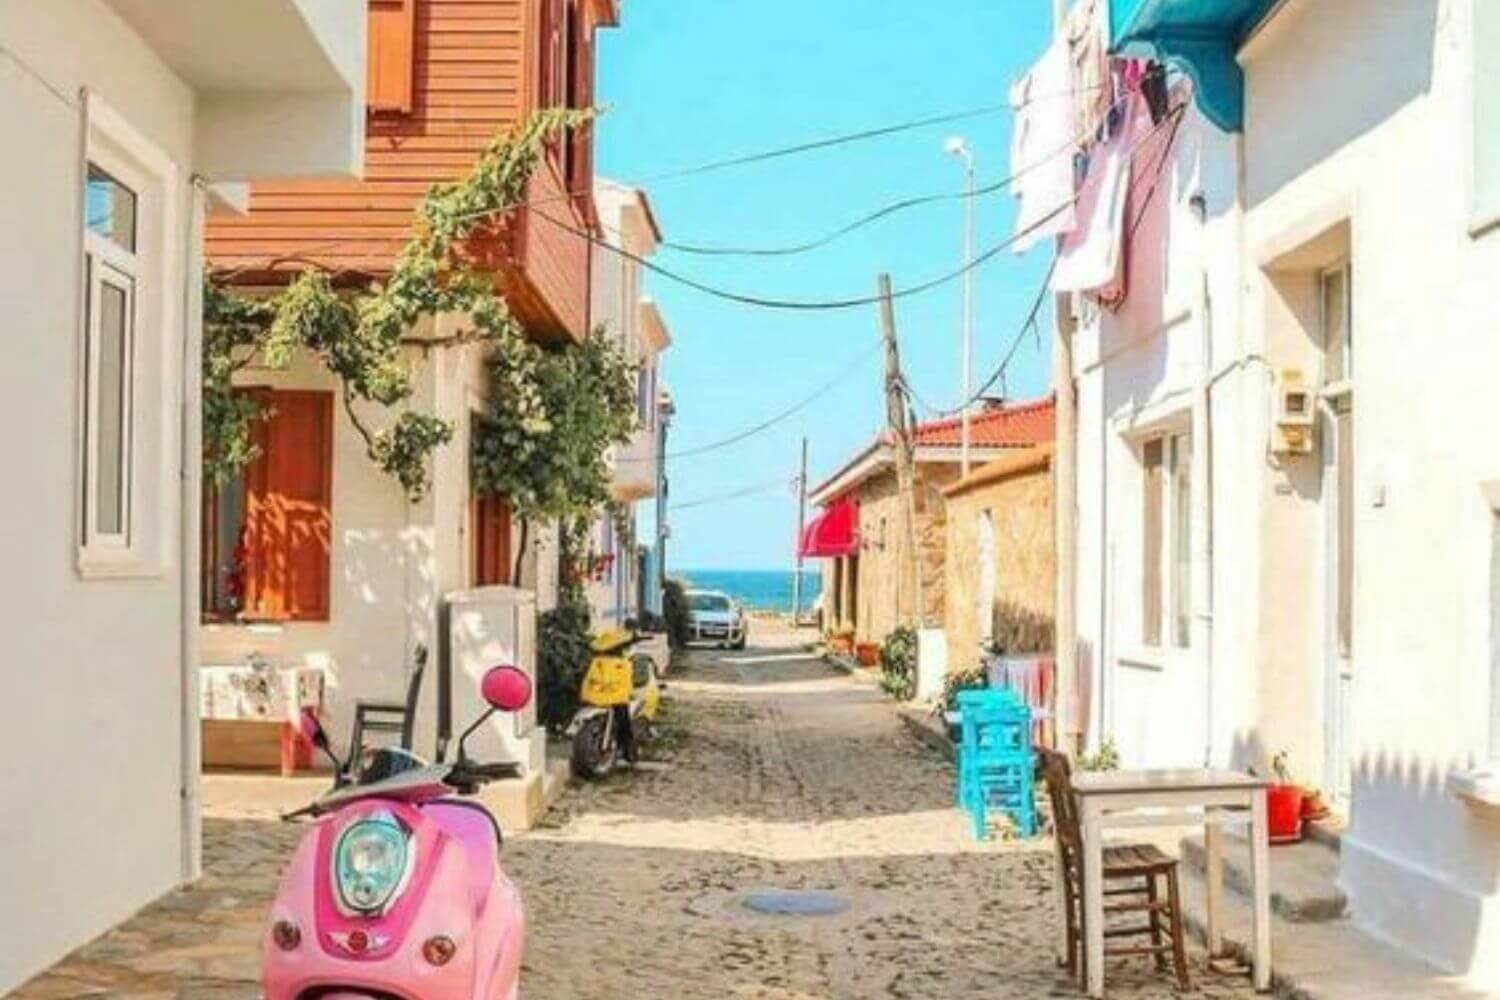 Datca street are narrow but pleasant, especially in winter